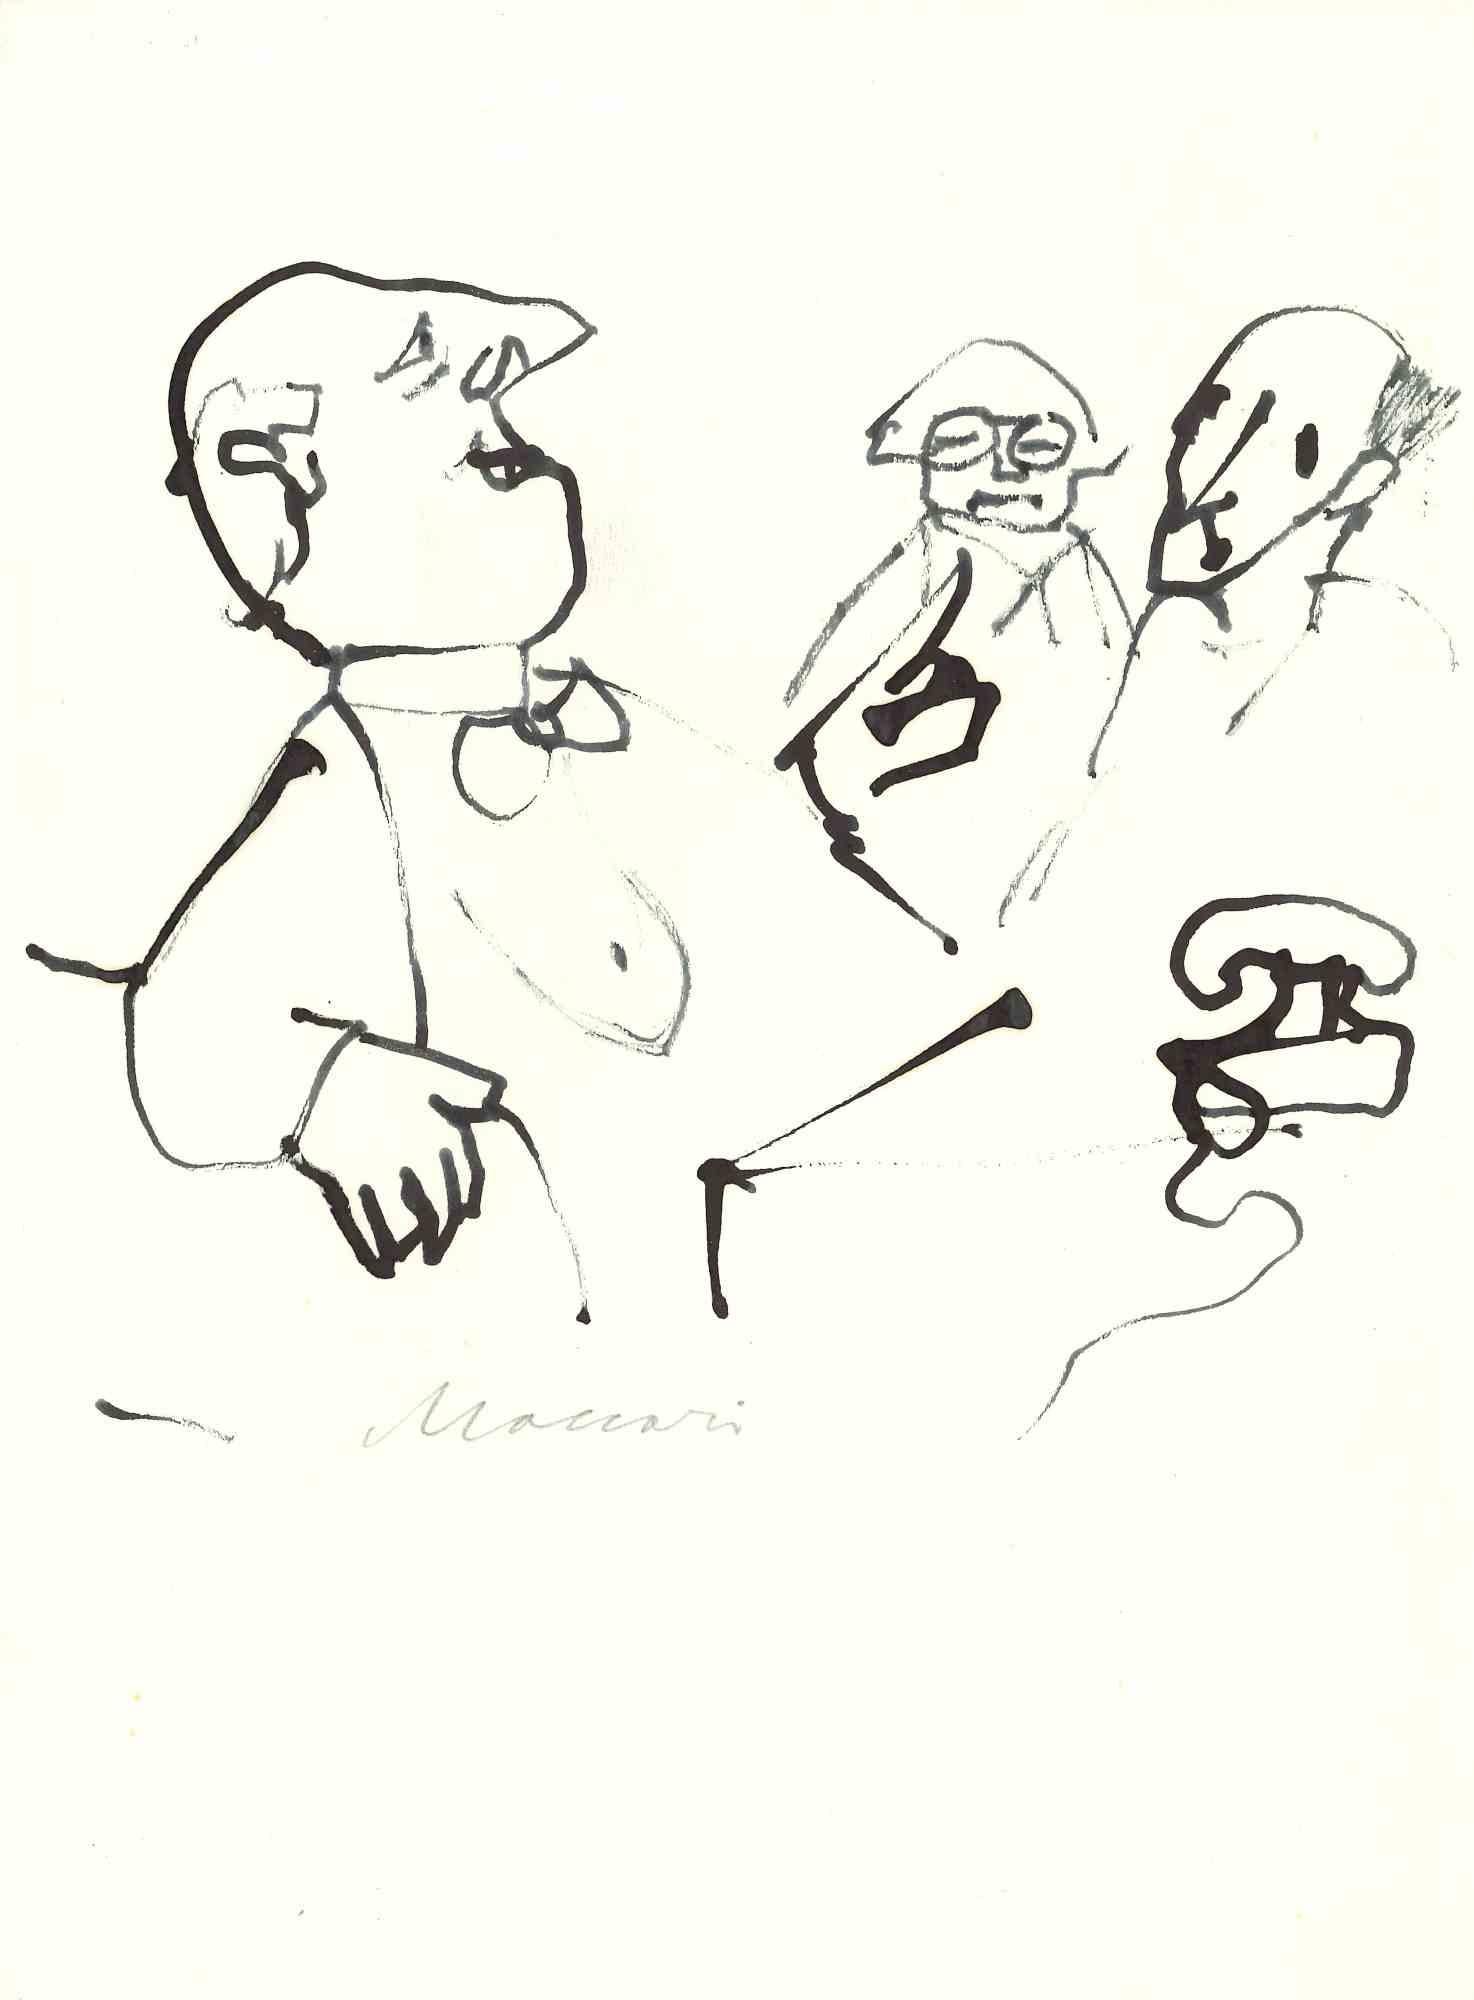 Conversation is an original drawing on paper, realized around the Seventies by the great Italian artist and journalist, Mino Maccari (Siena, 1898 - 1989). 

Black marker drawing on ivory-colored and watermarked paper “Chinese paper”. 

Signed